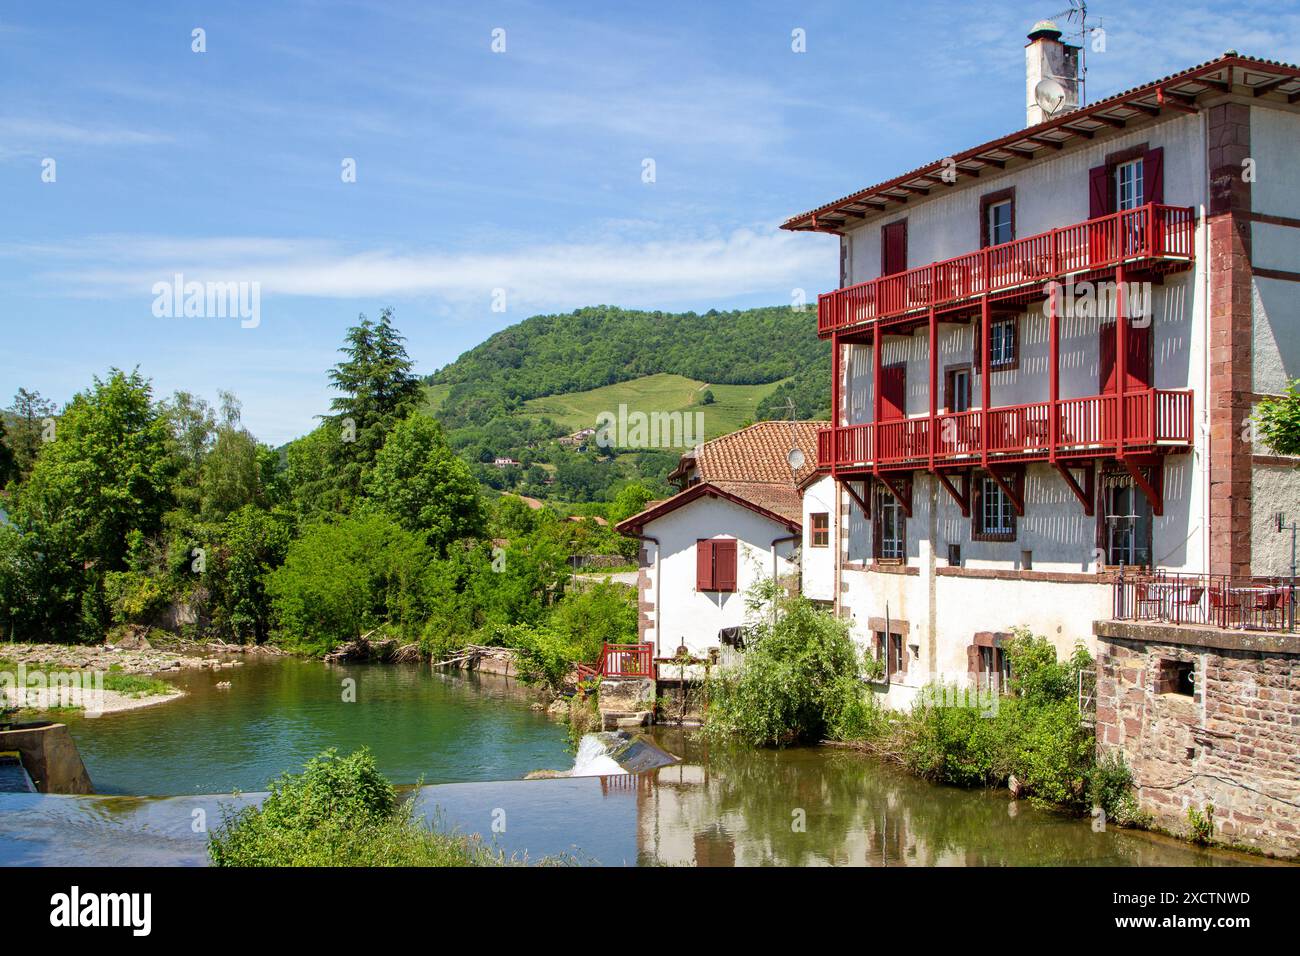 The river Nive flowing through the French town of Saint-Jean-Pied-de-Port the traditional start of the Camino de Santiago the way of St James walk Stock Photo